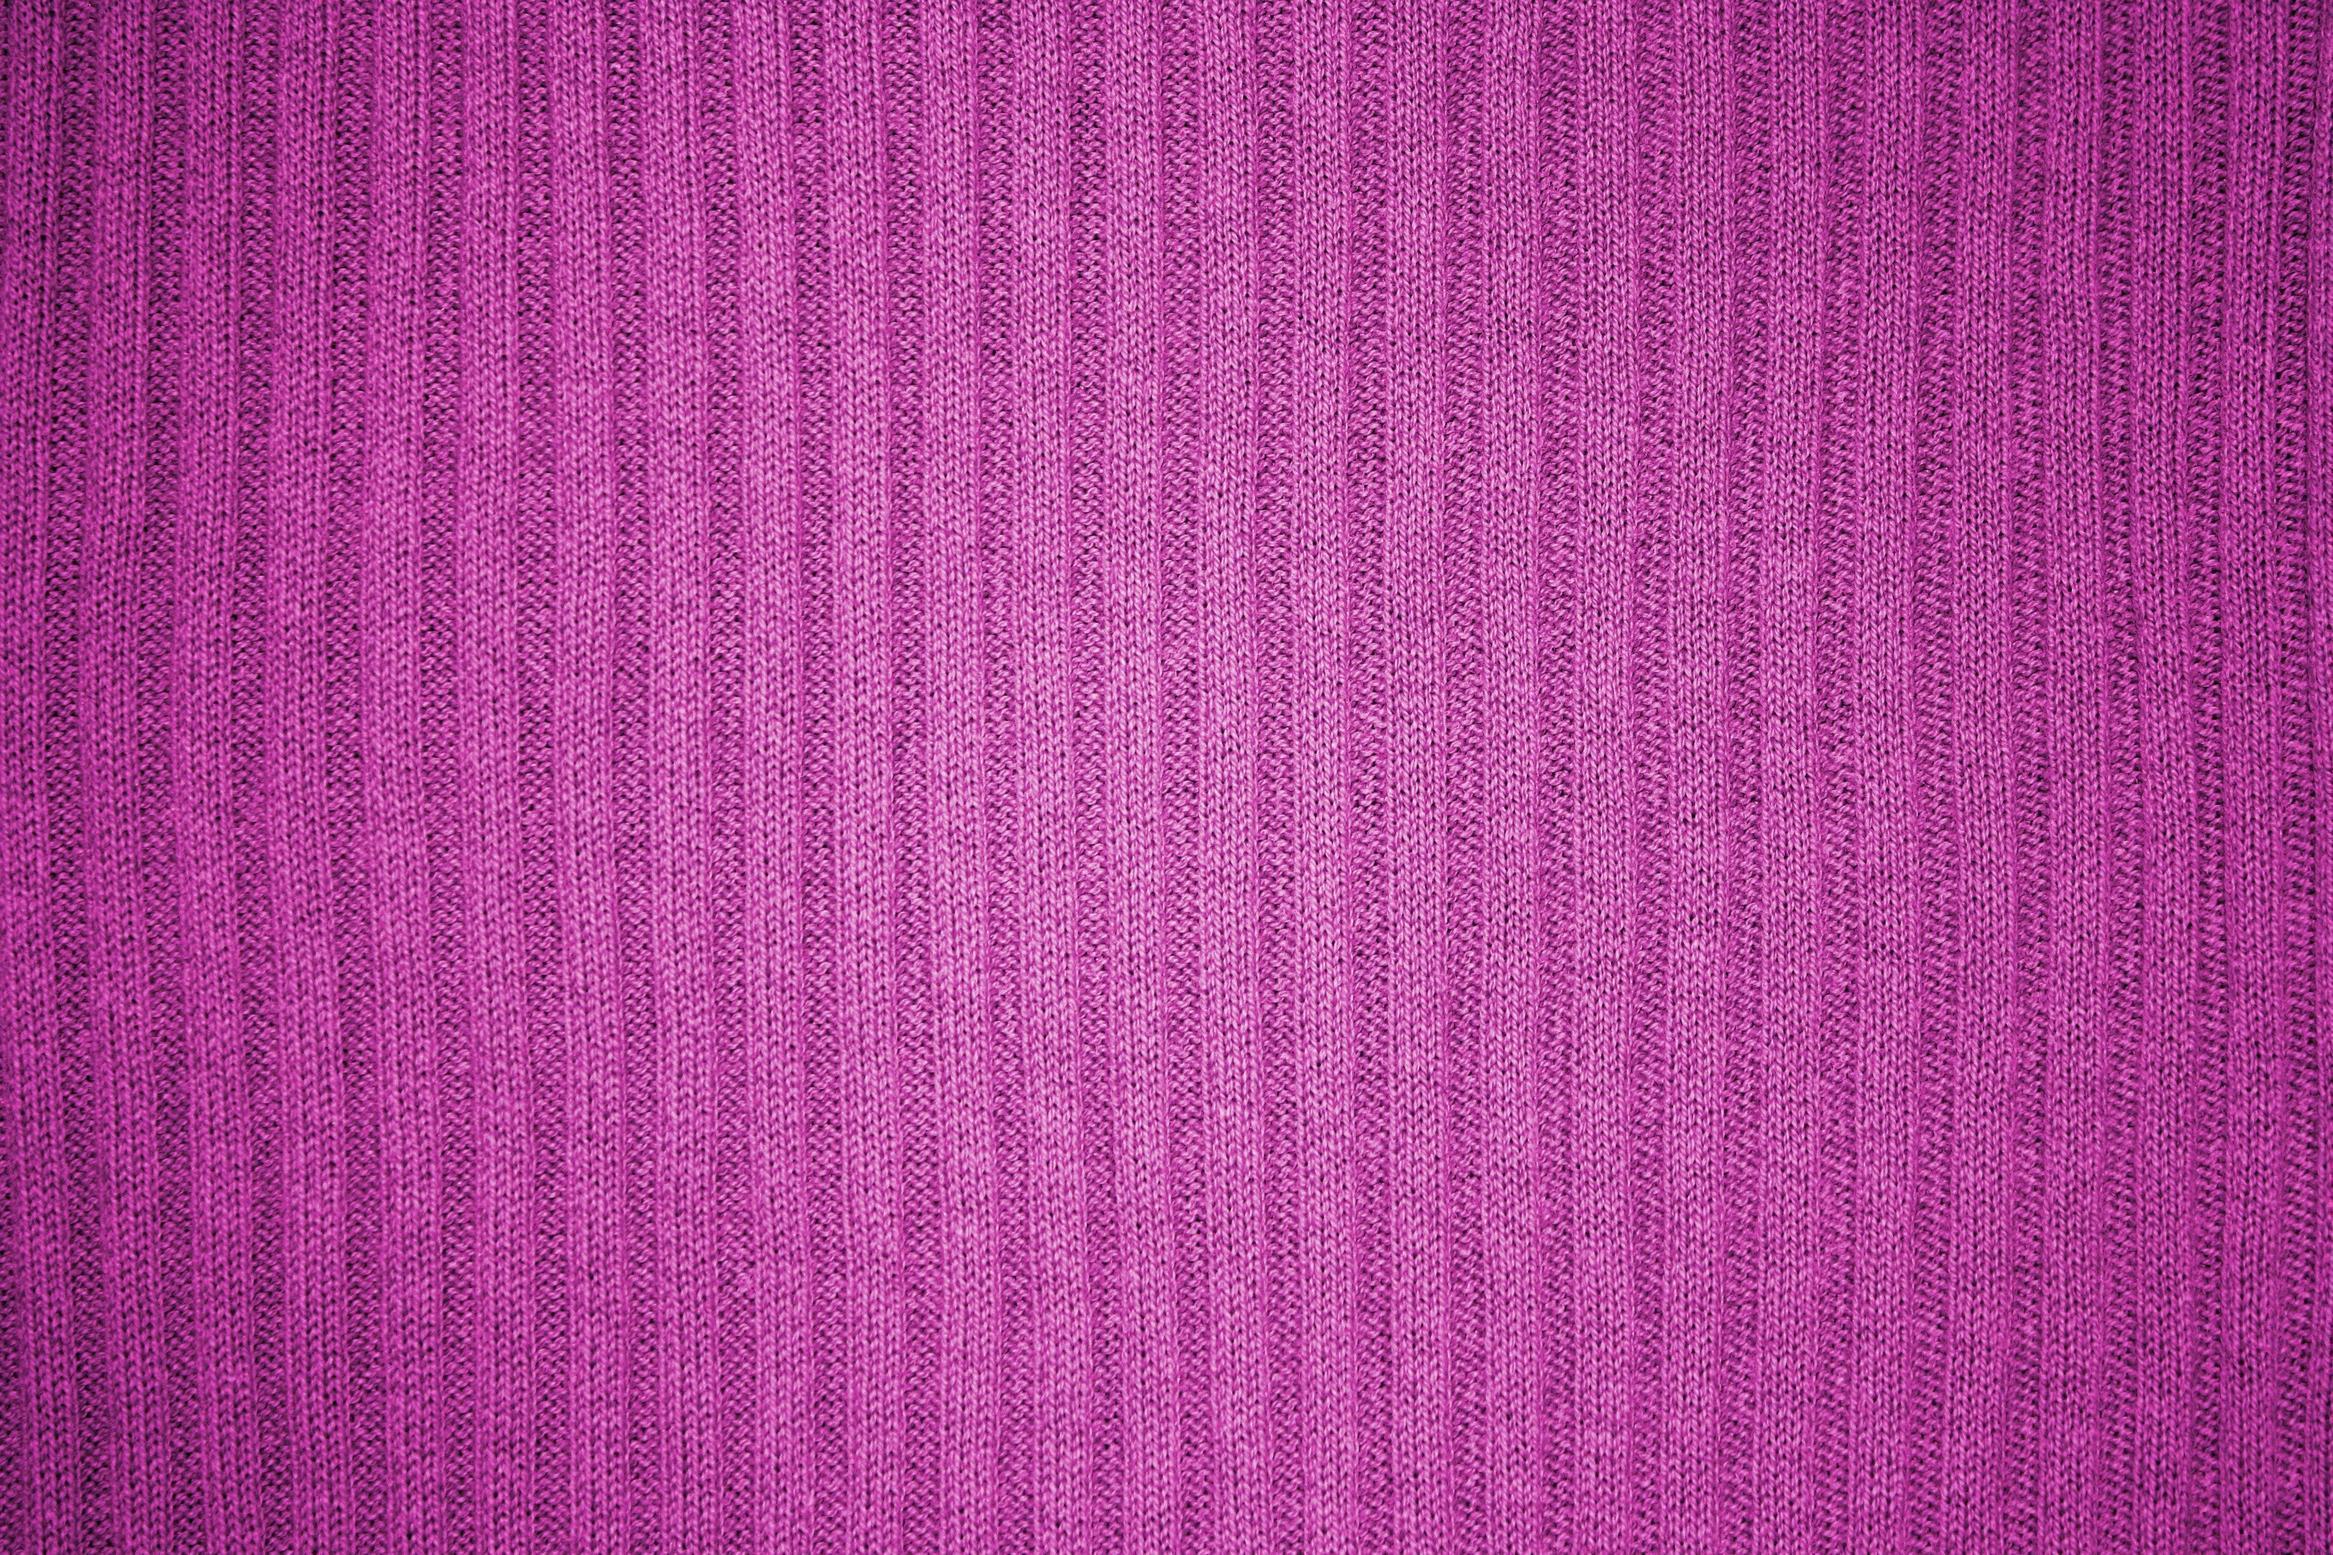 Magenta Ribbed Knit Fabric Texture Picture. Free Photograph